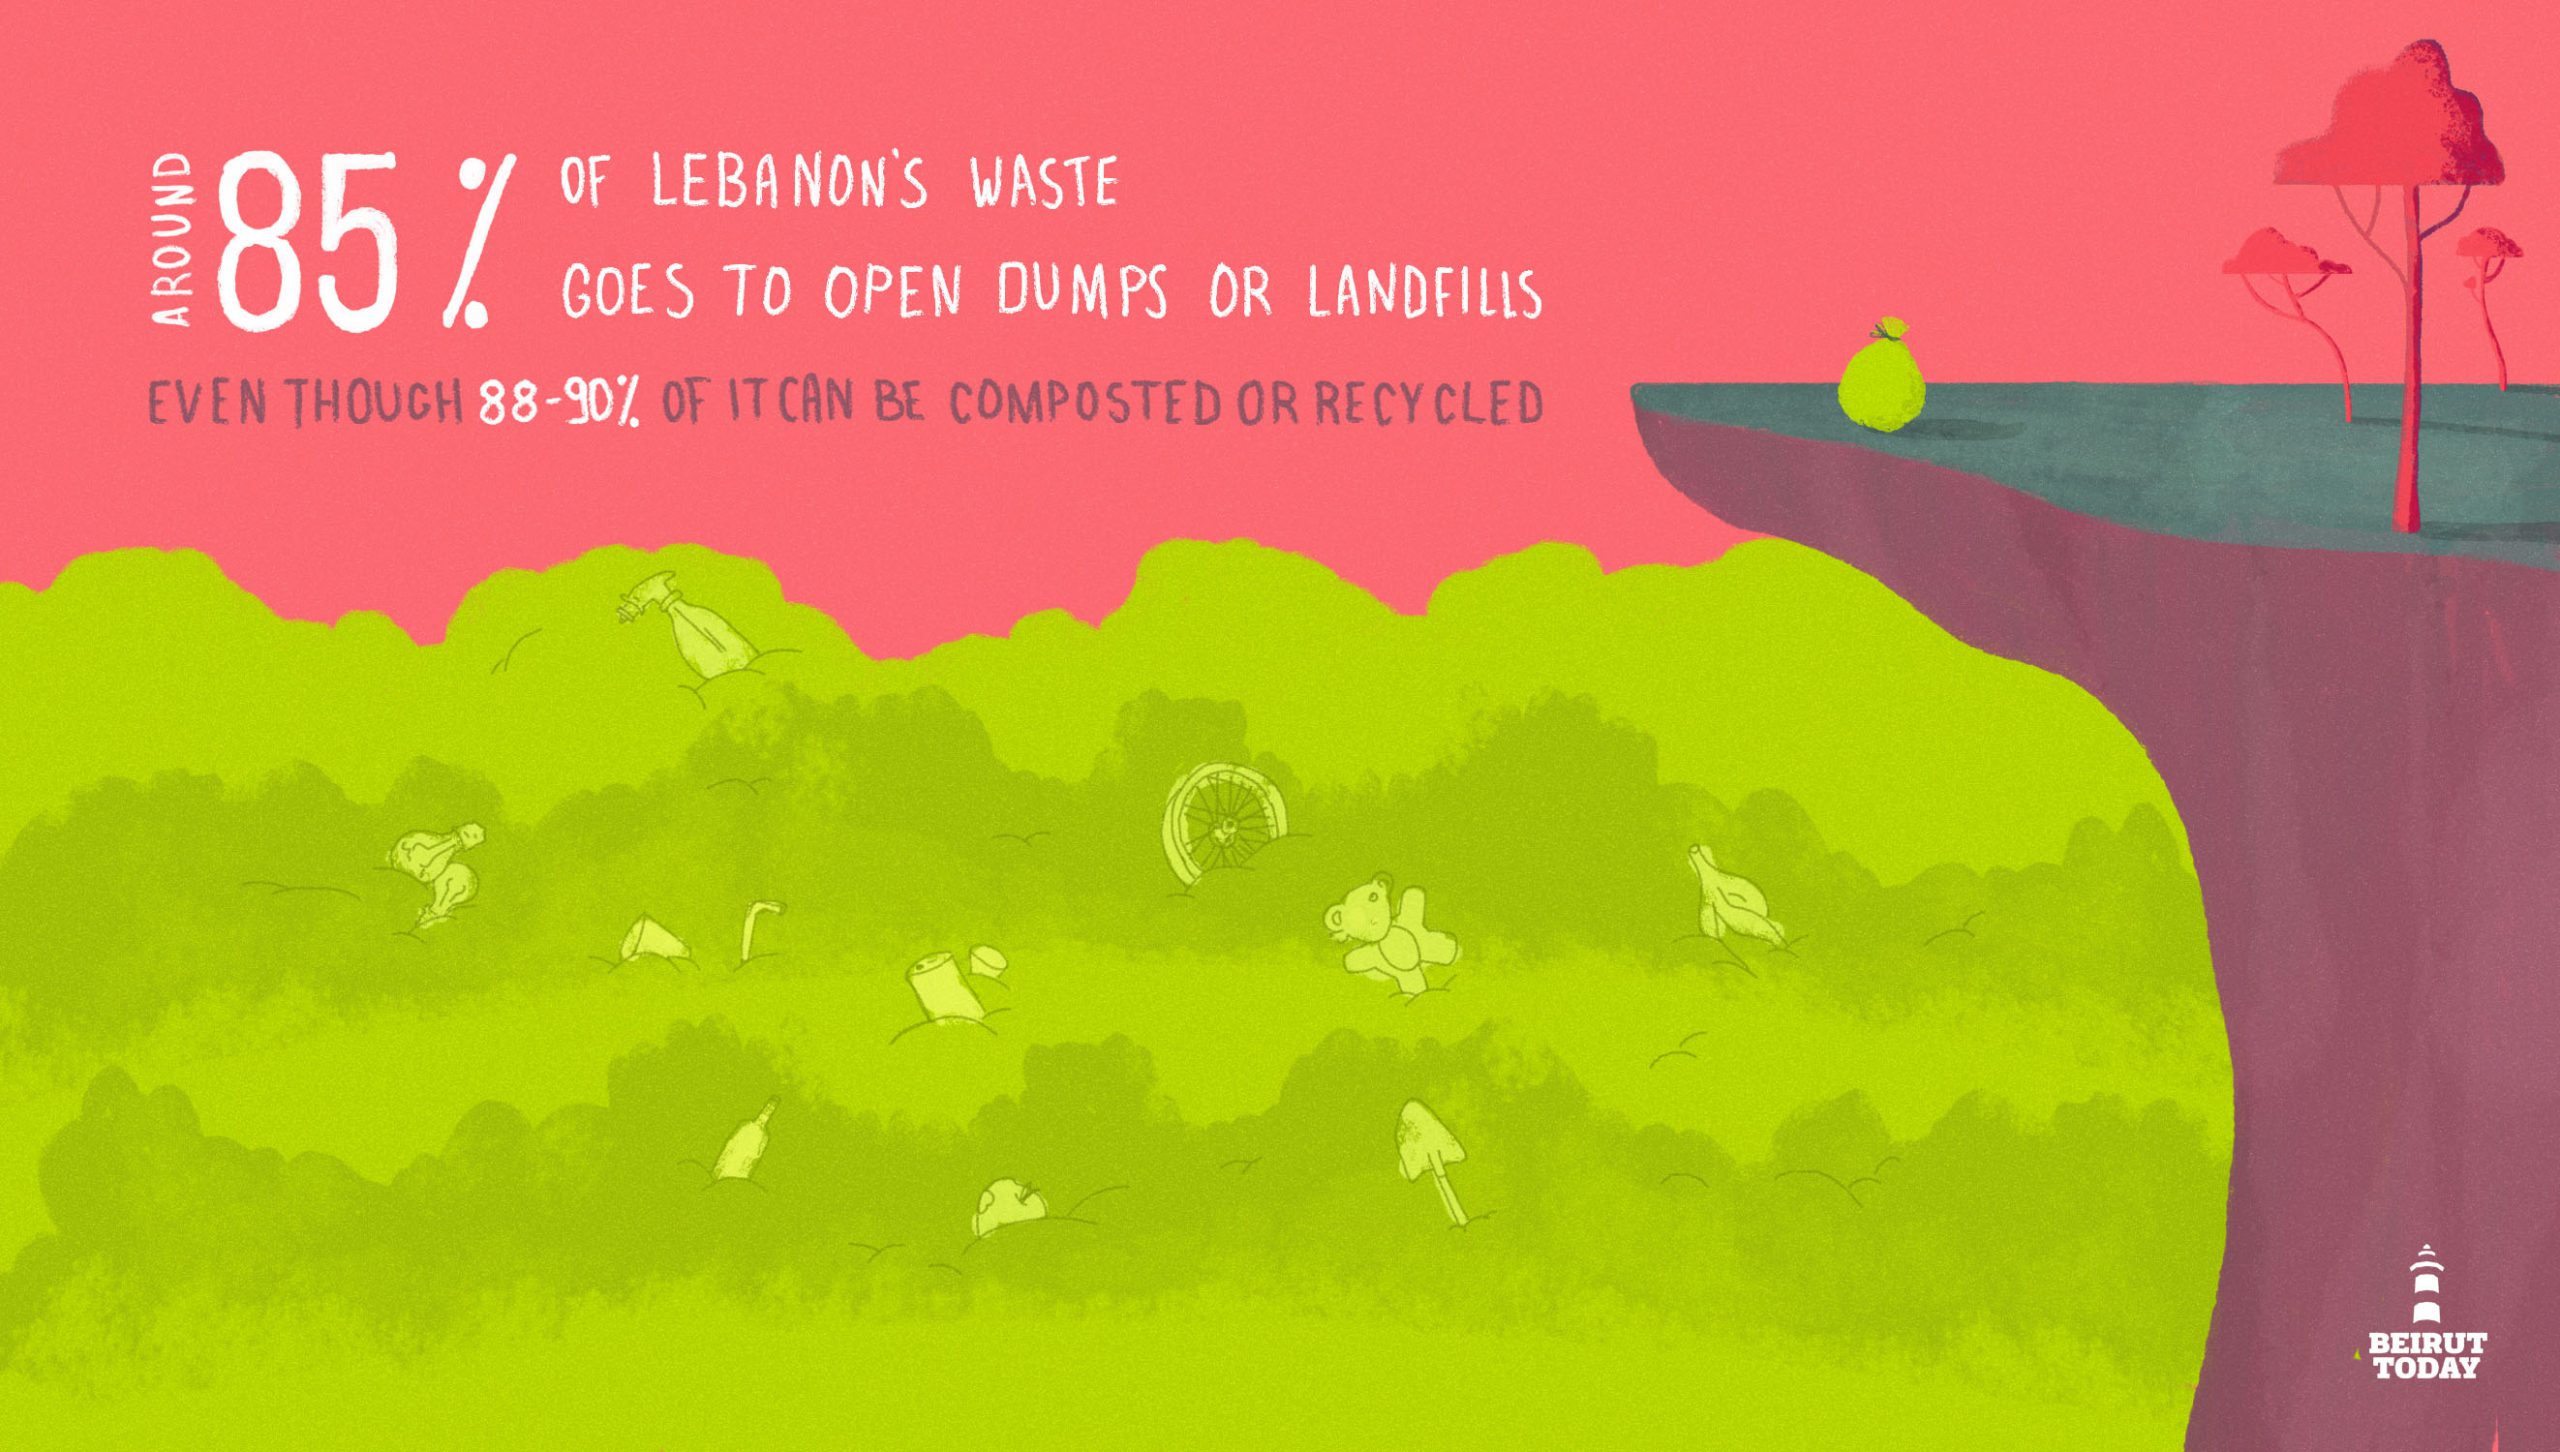 Garbage crisis: Around 85 percent of Lebanon's waste goes to open dumps or landfills, even though 88 to 90 percent of it can be composted or recycled. (Infographic by Christina Atik)